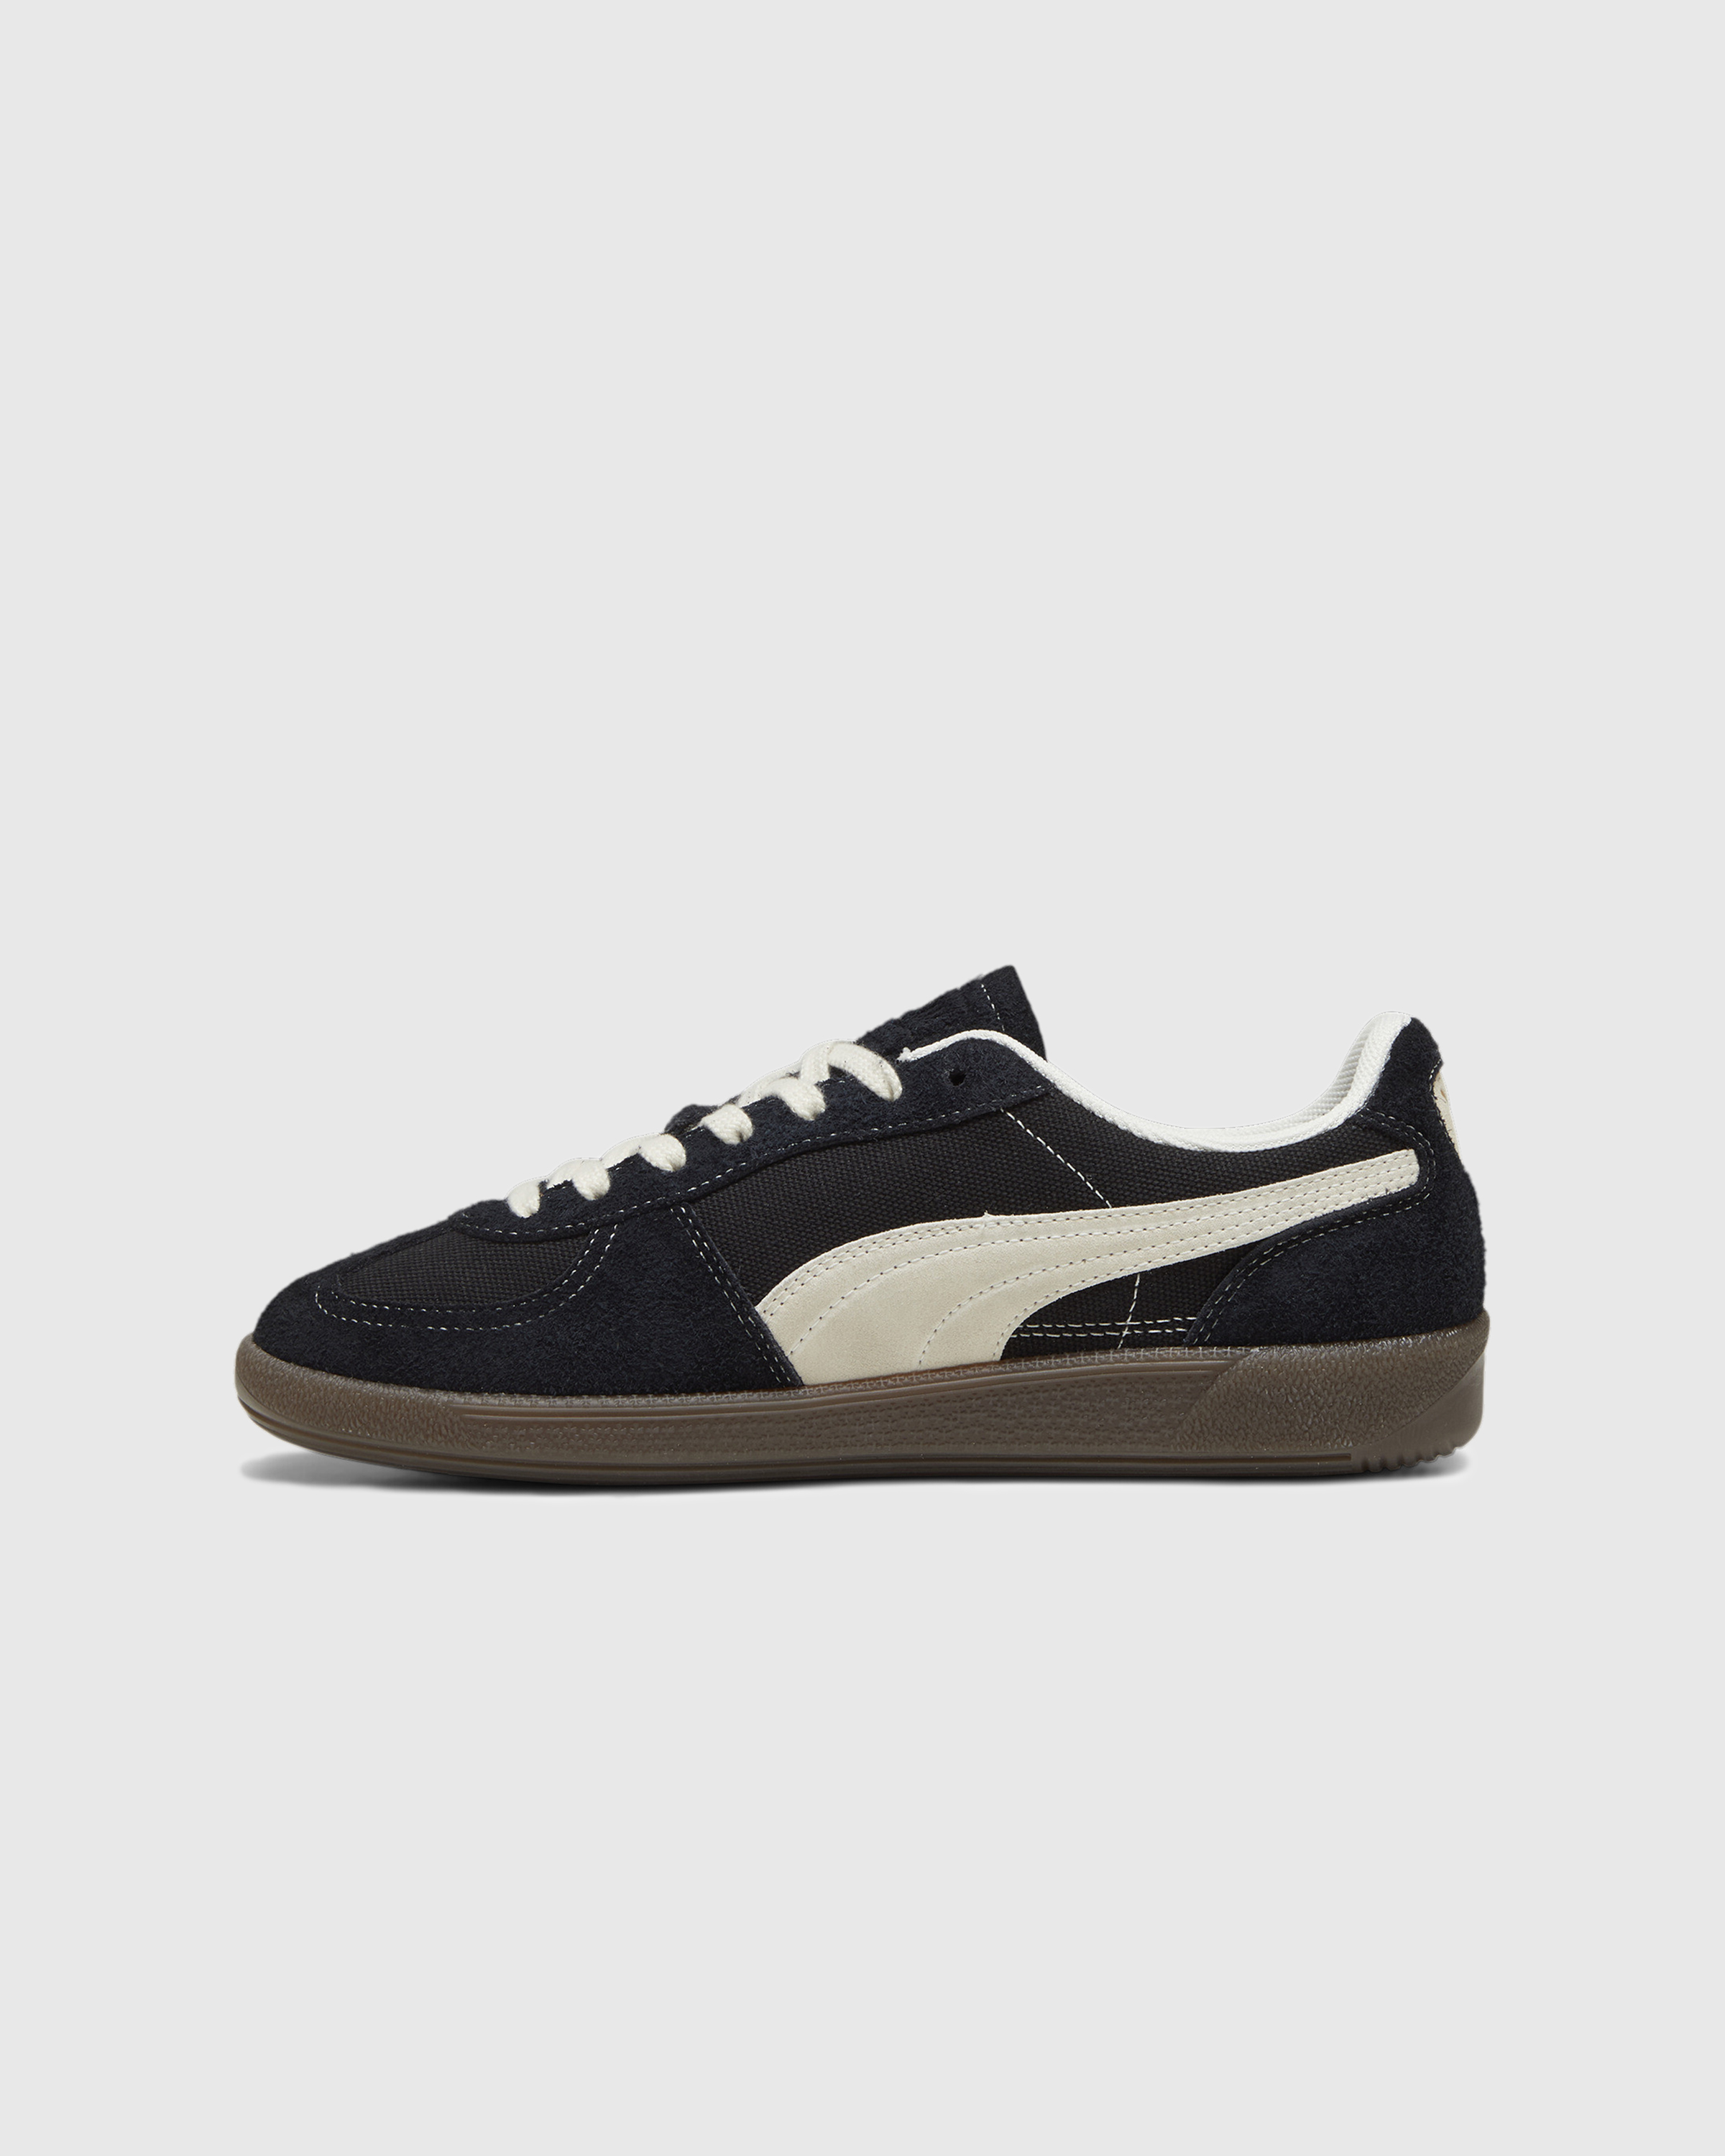 Puma – Palermo Vintage Black/Frosted Ivory/Gum - Low Top Sneakers - Black - Image 2